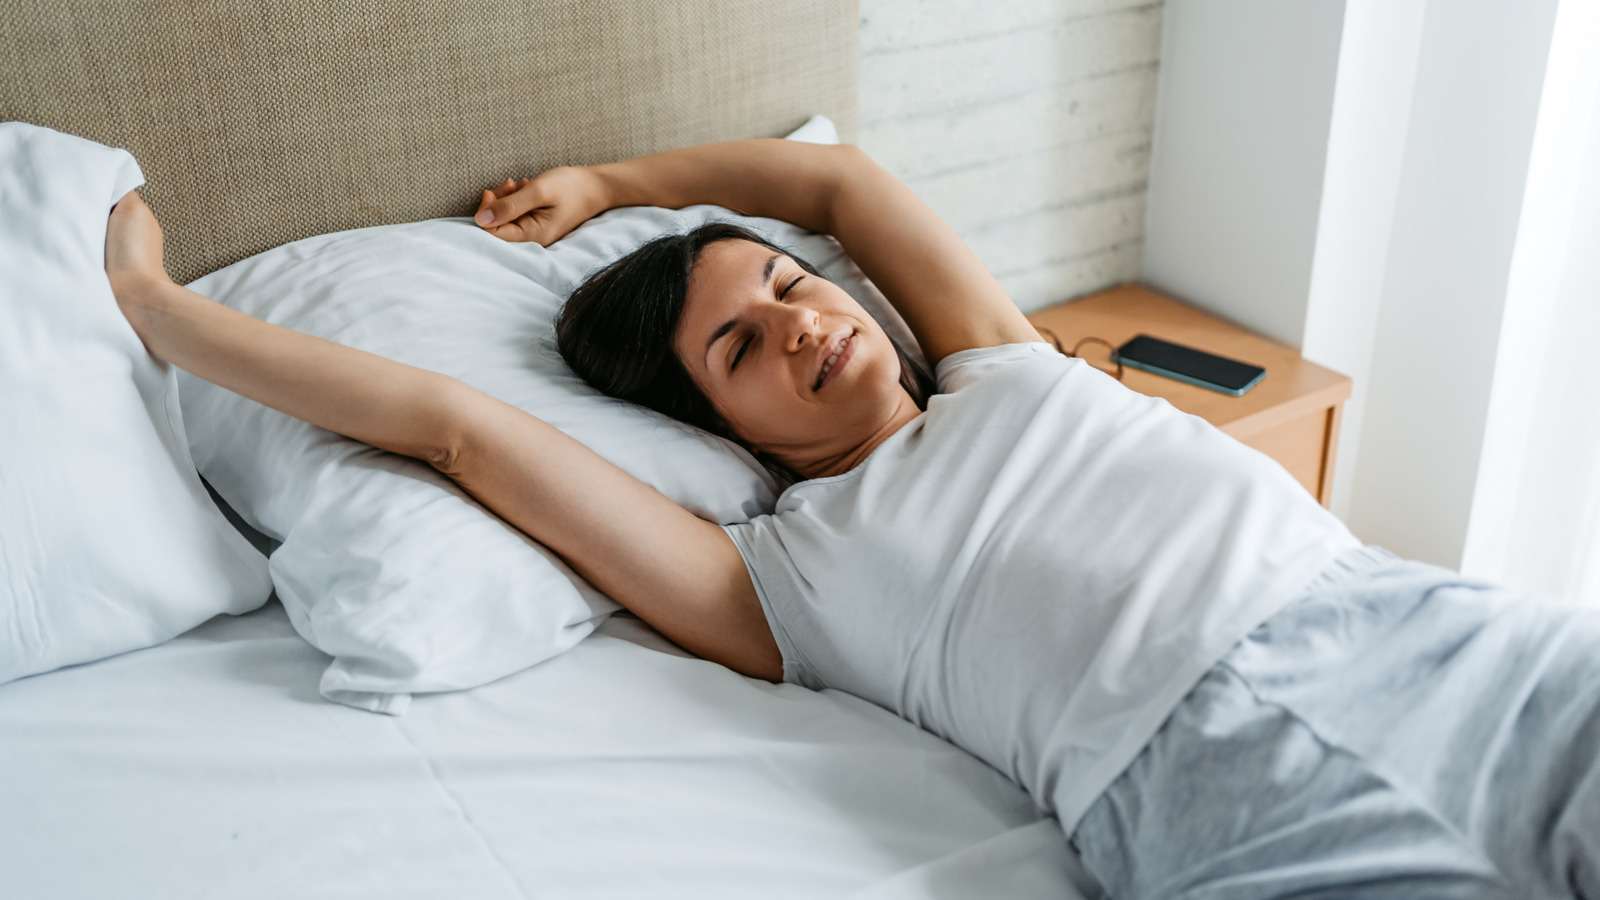 When You Sleep In, This Is What Happens To Your Blood Pressure - Health Digest